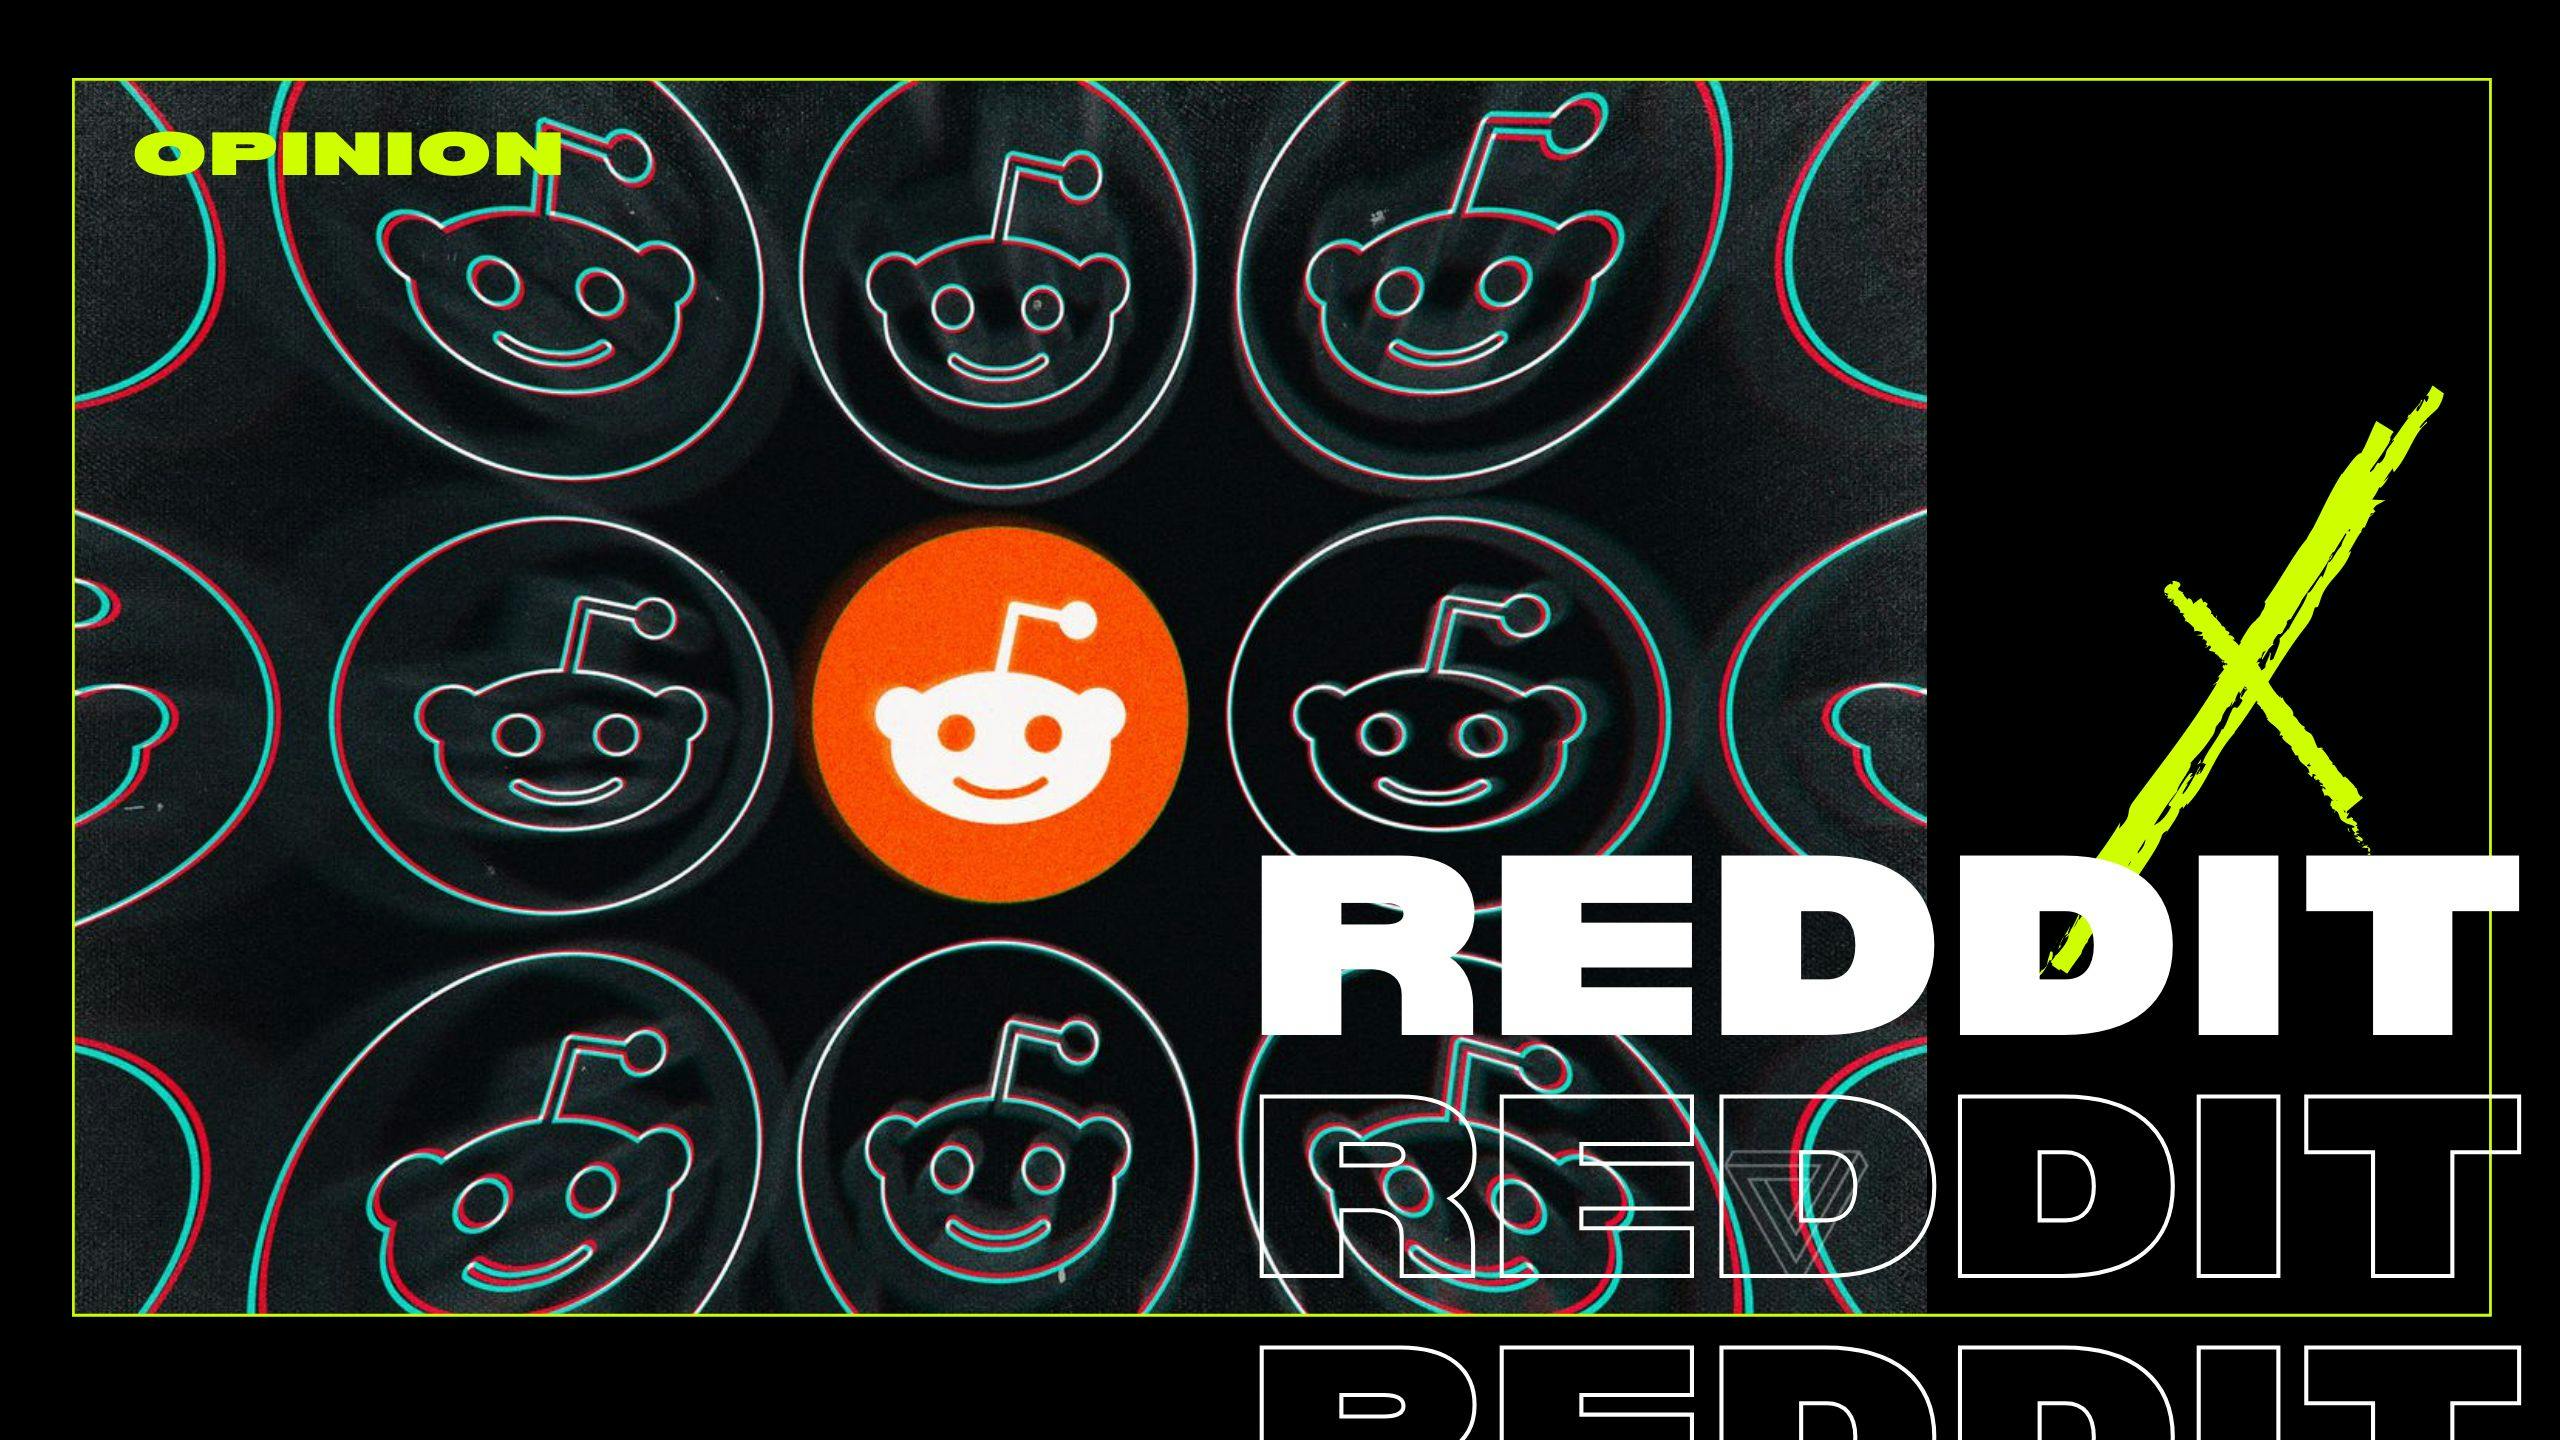 featured image - The Reddit Rollercoaster Underlines the Changing Nature of Social Media